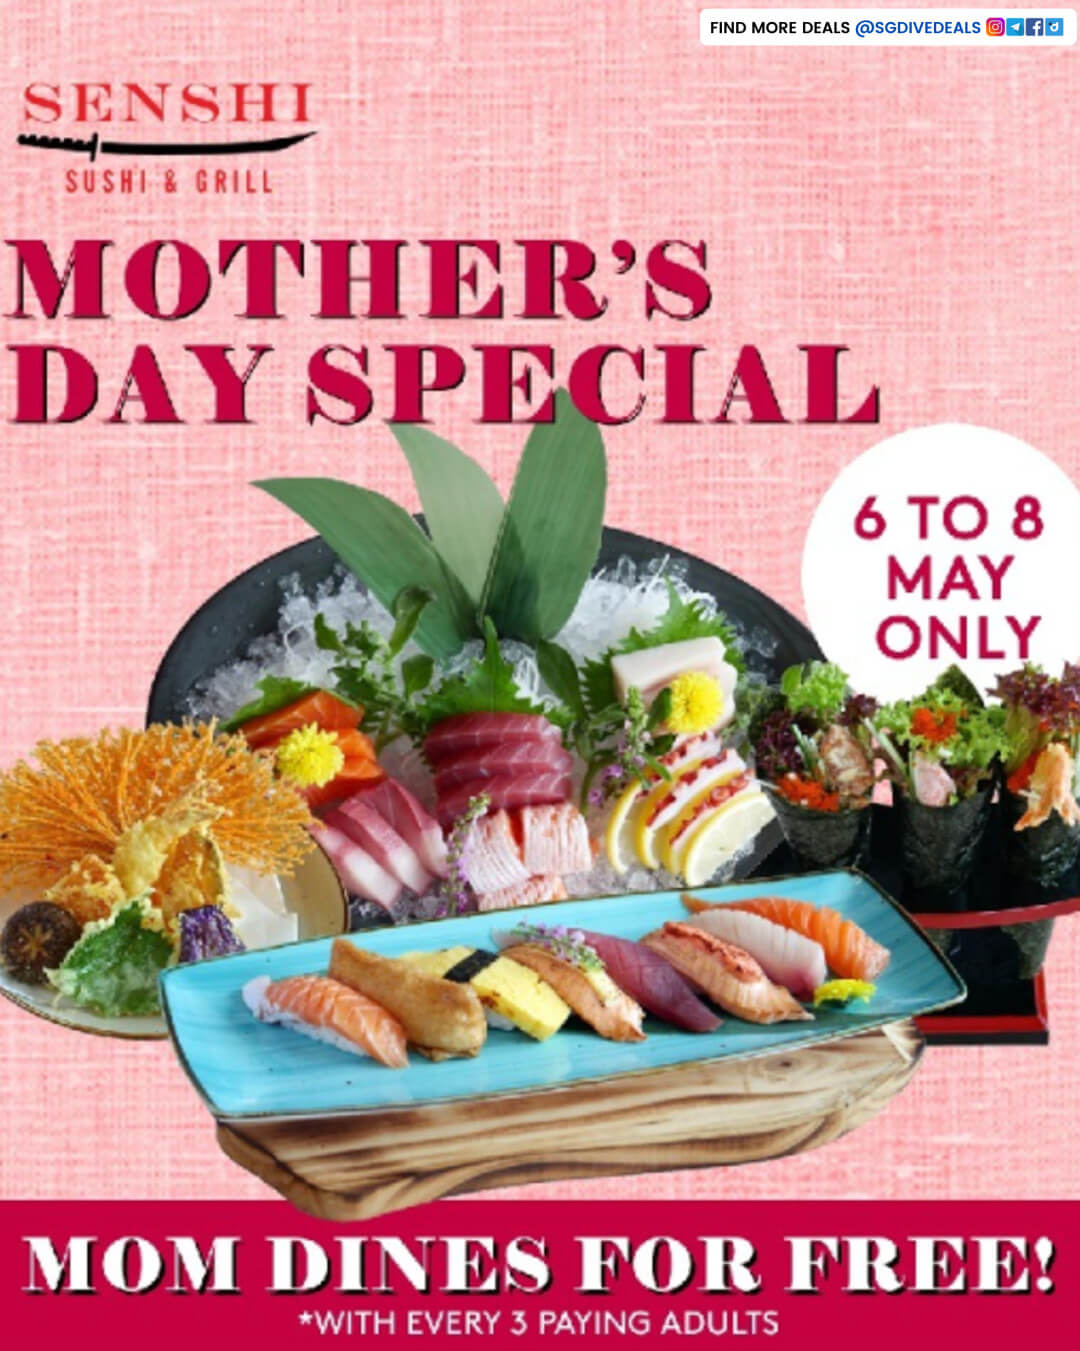 Senshi Sushi & Grill,Mother's Day Special